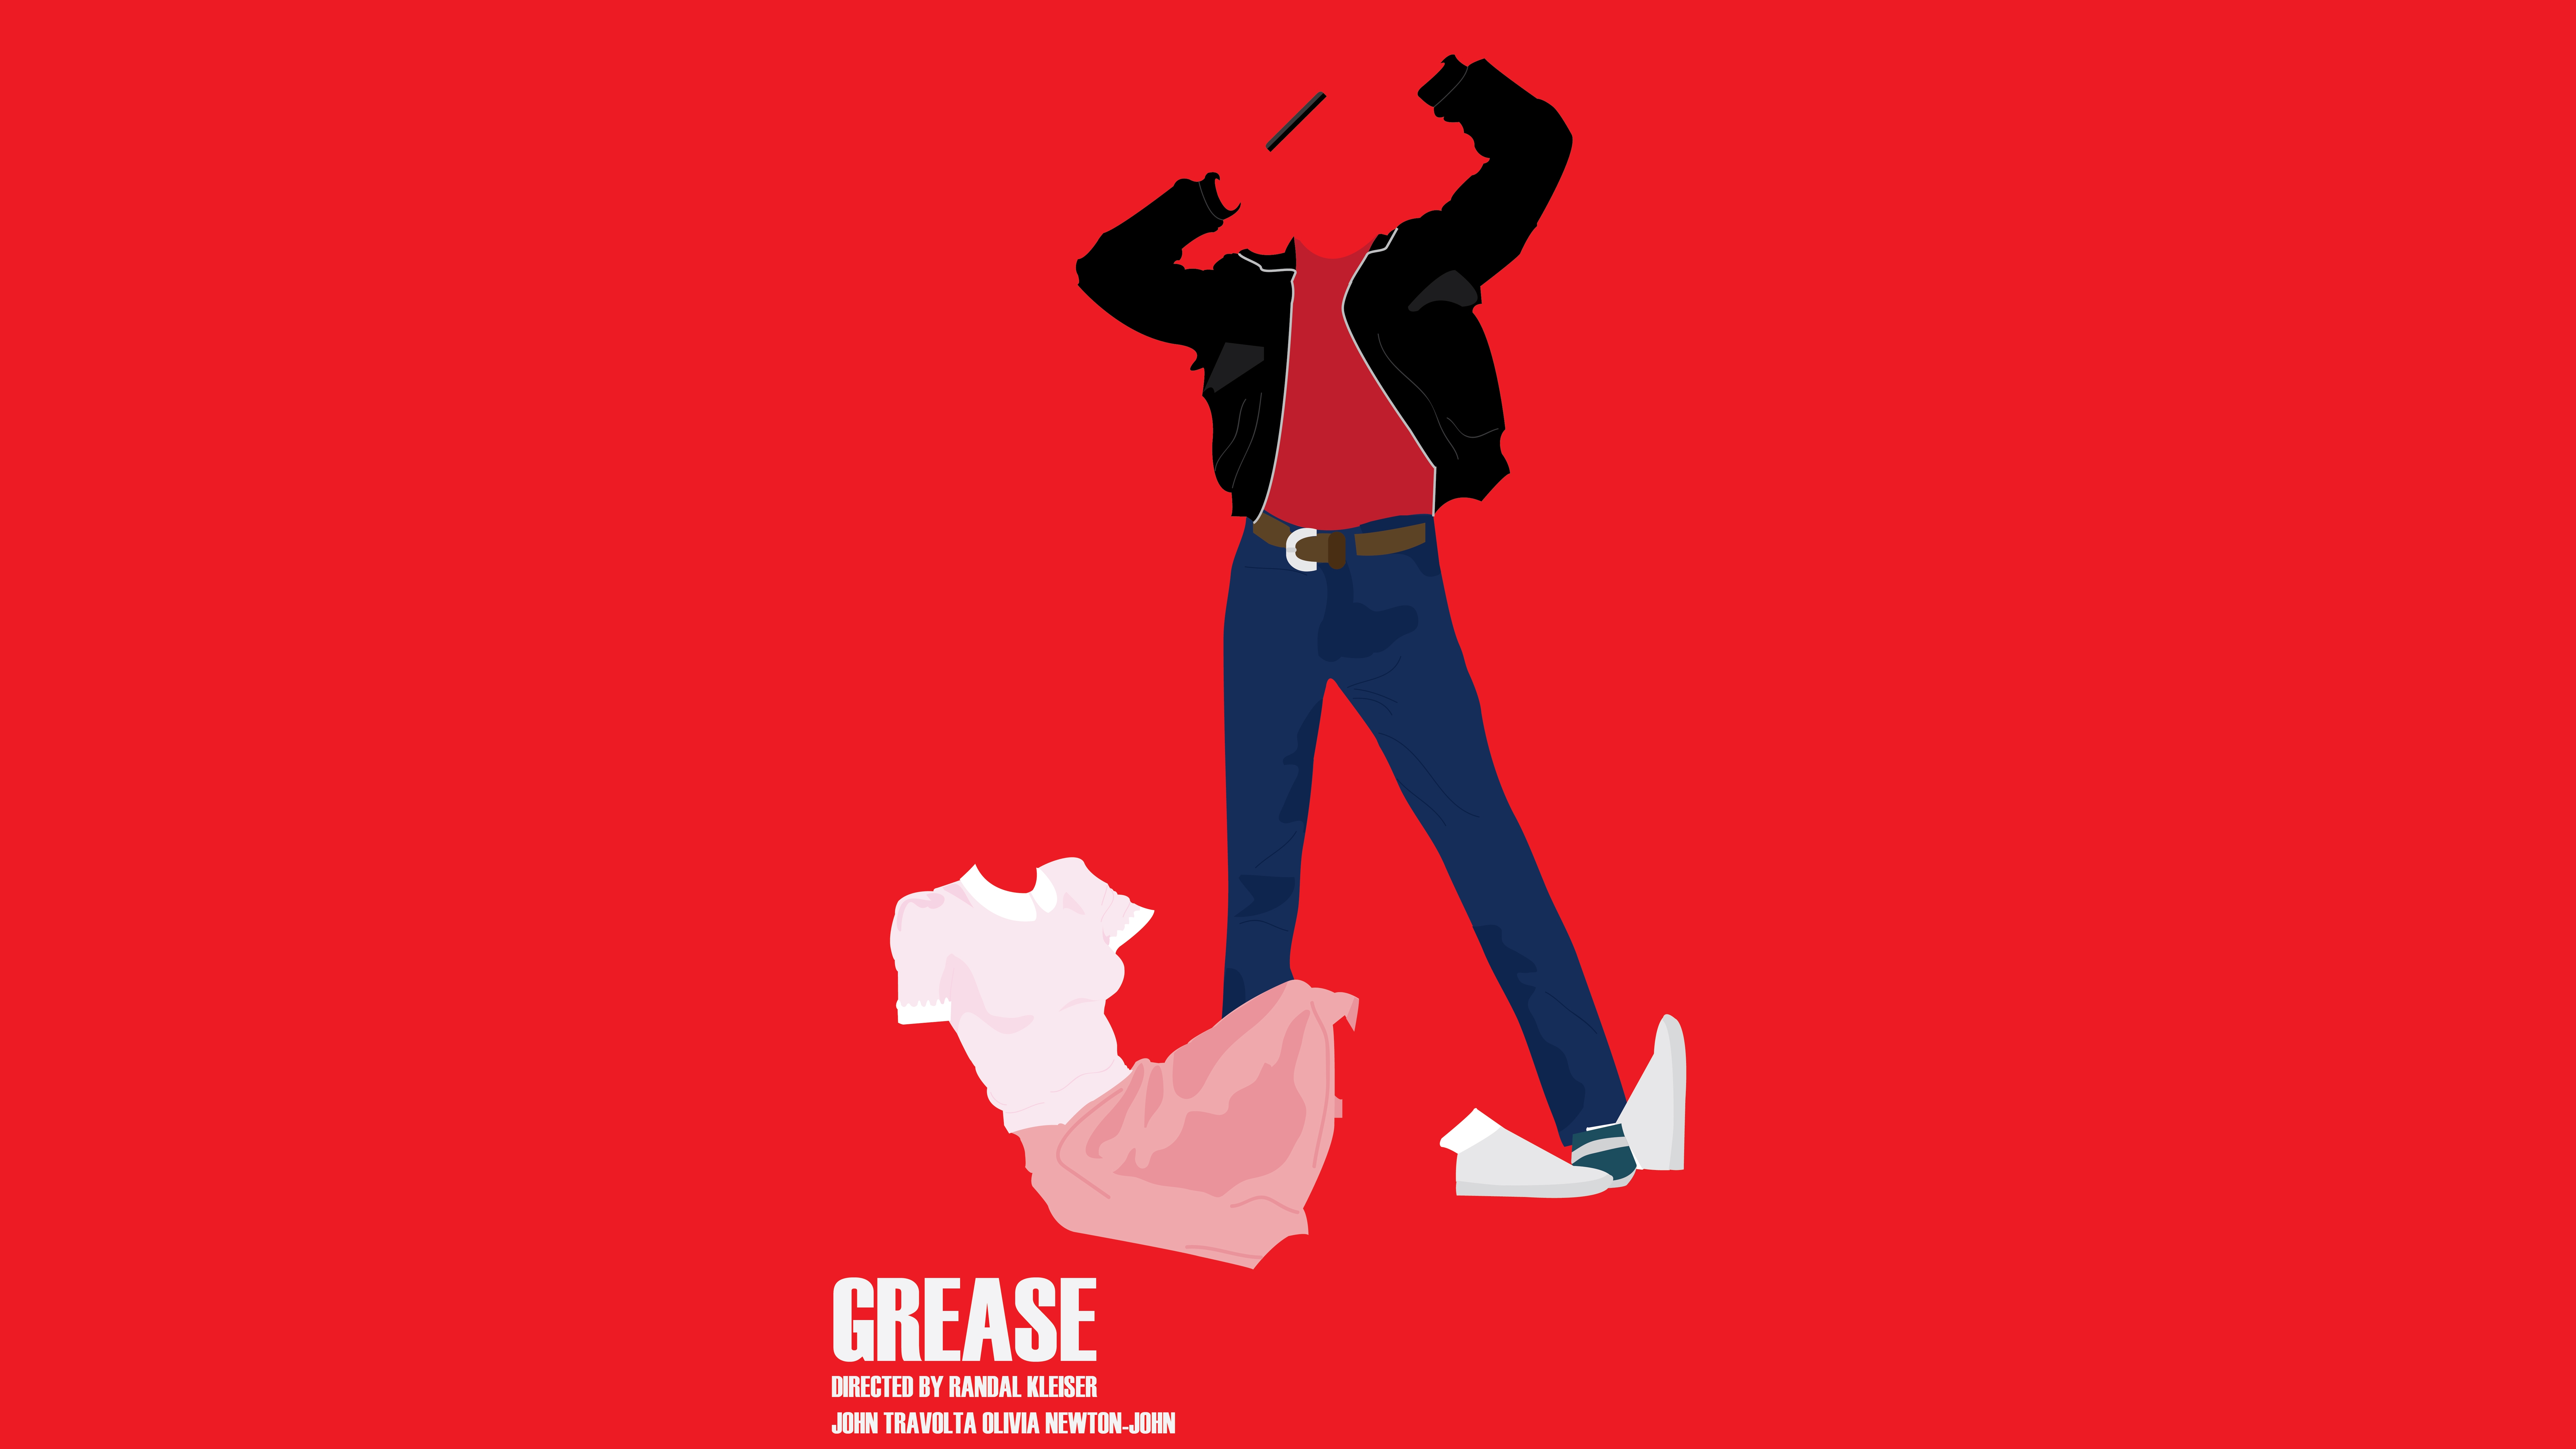 Grease HD Wallpaper Background Image